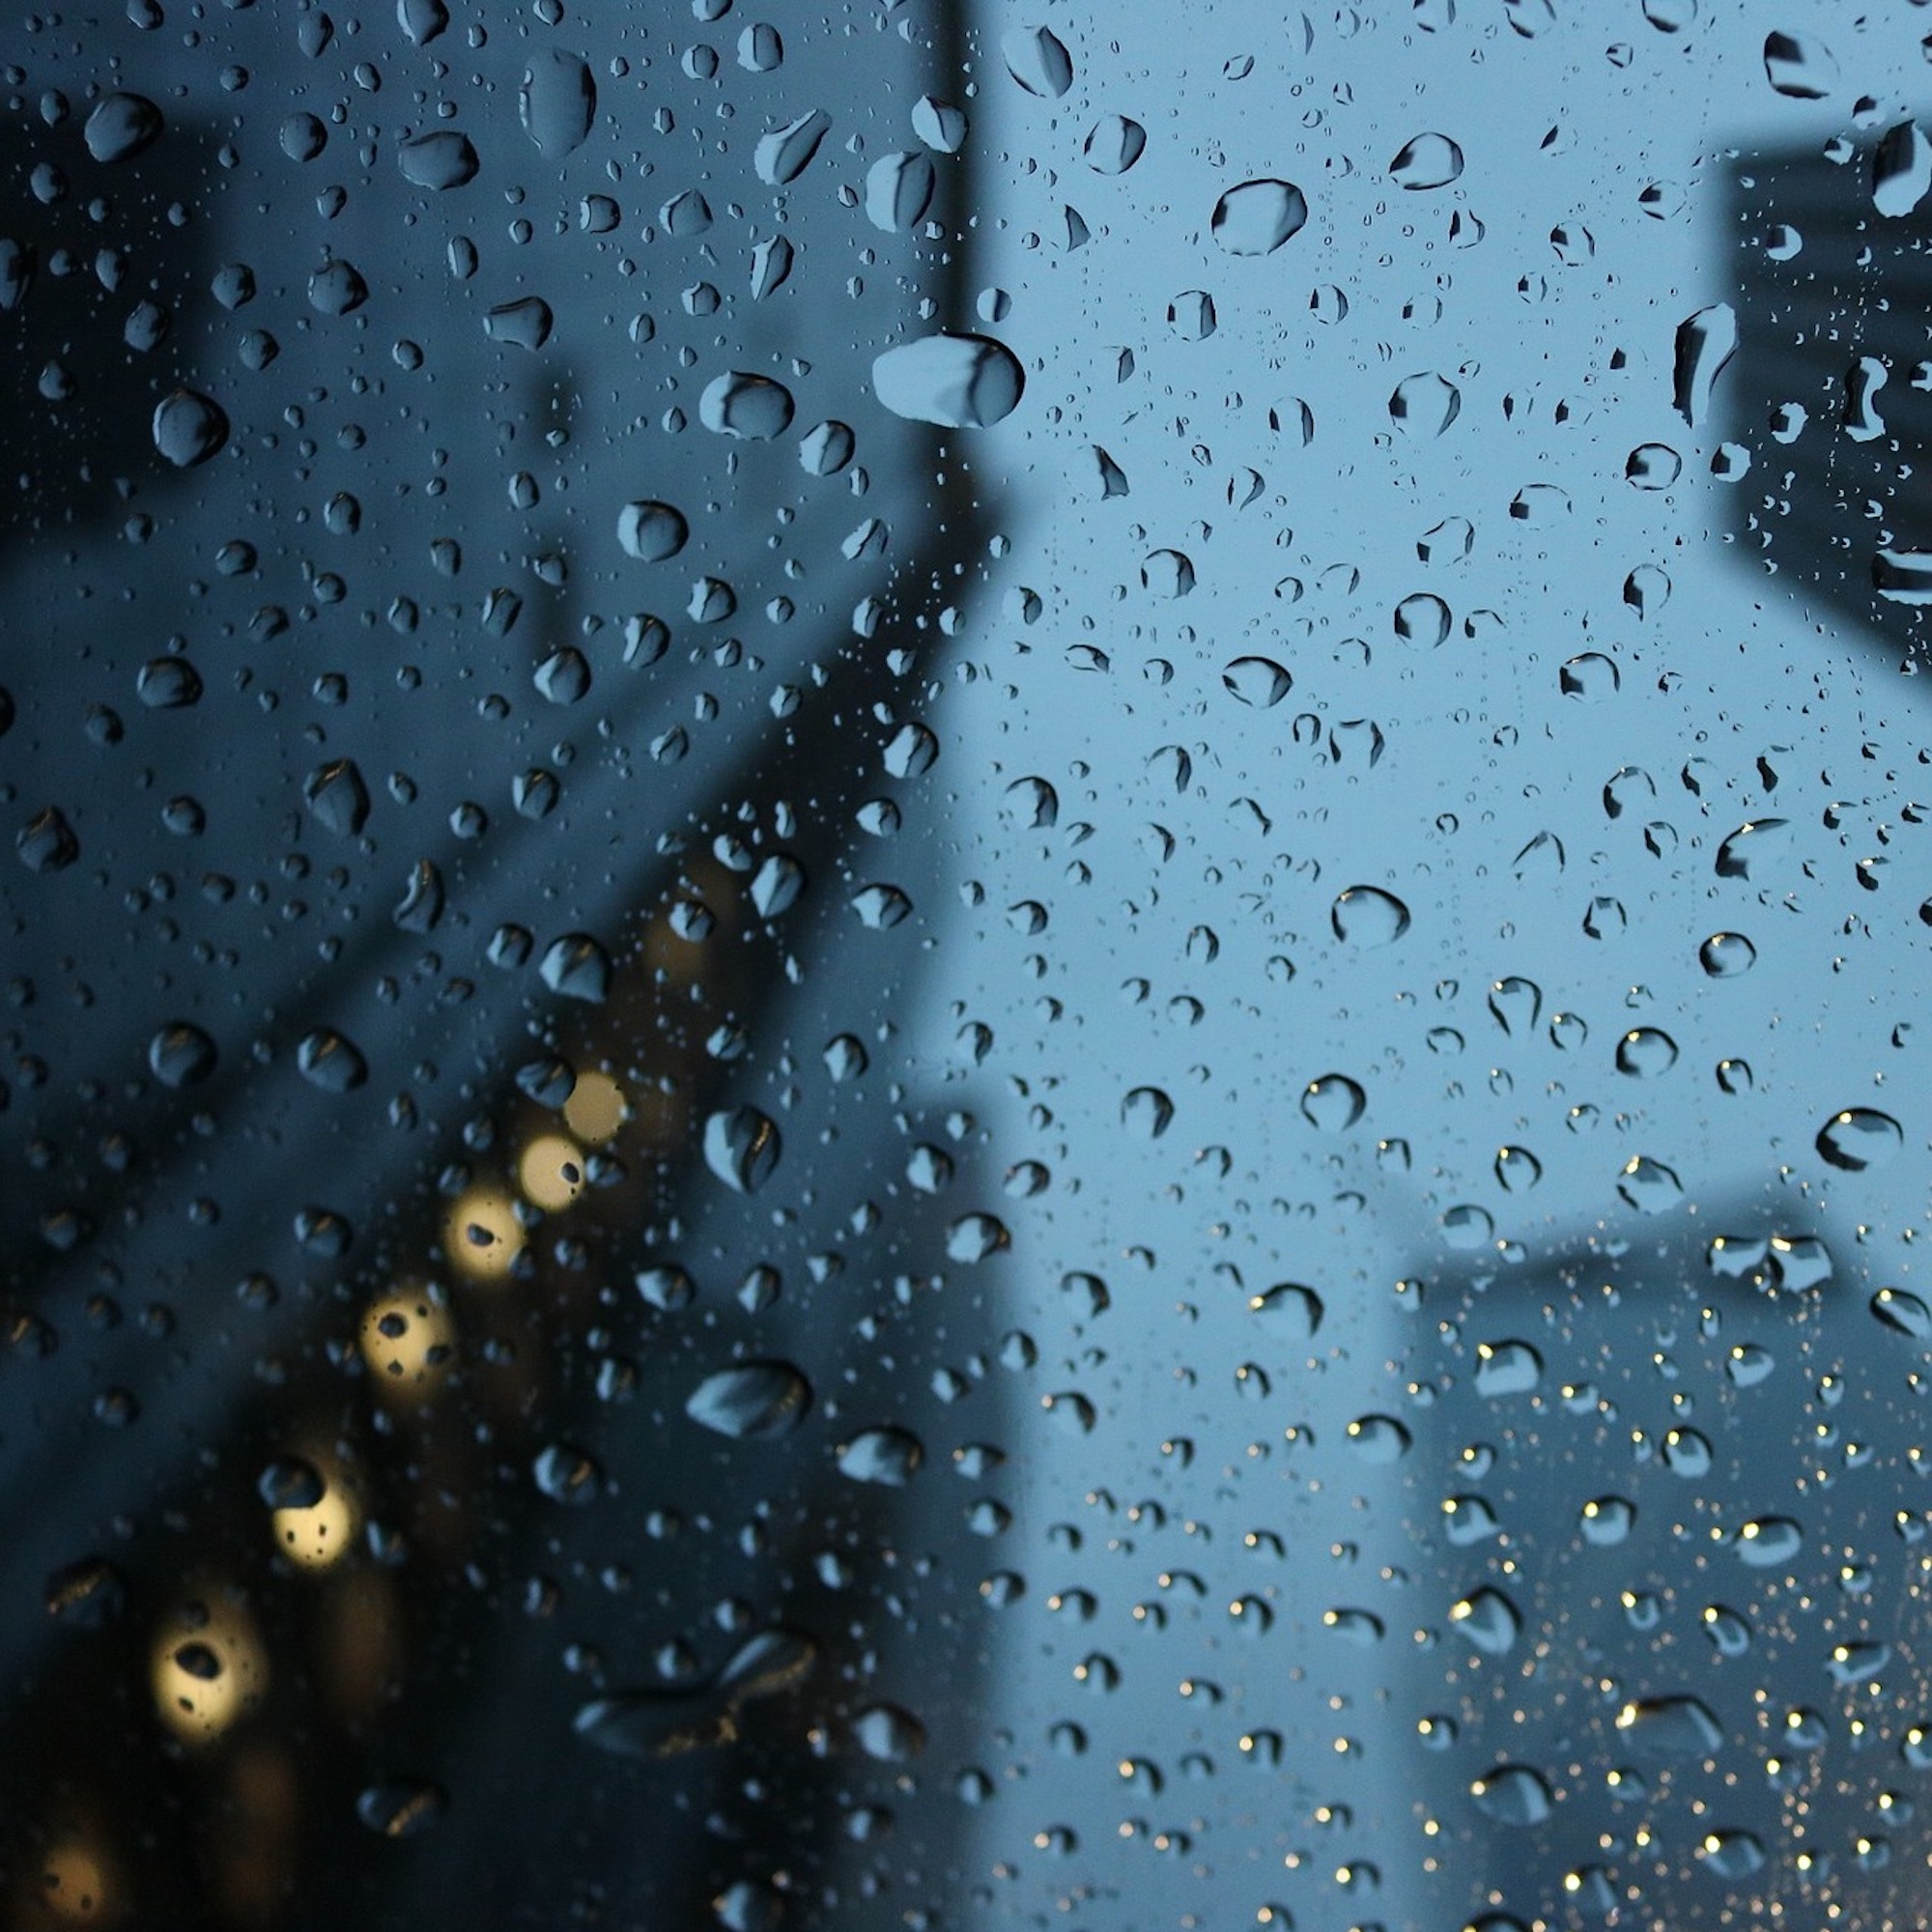 20 Soothing Rain Recordings to Relieve Stress and Enjoy the Moment